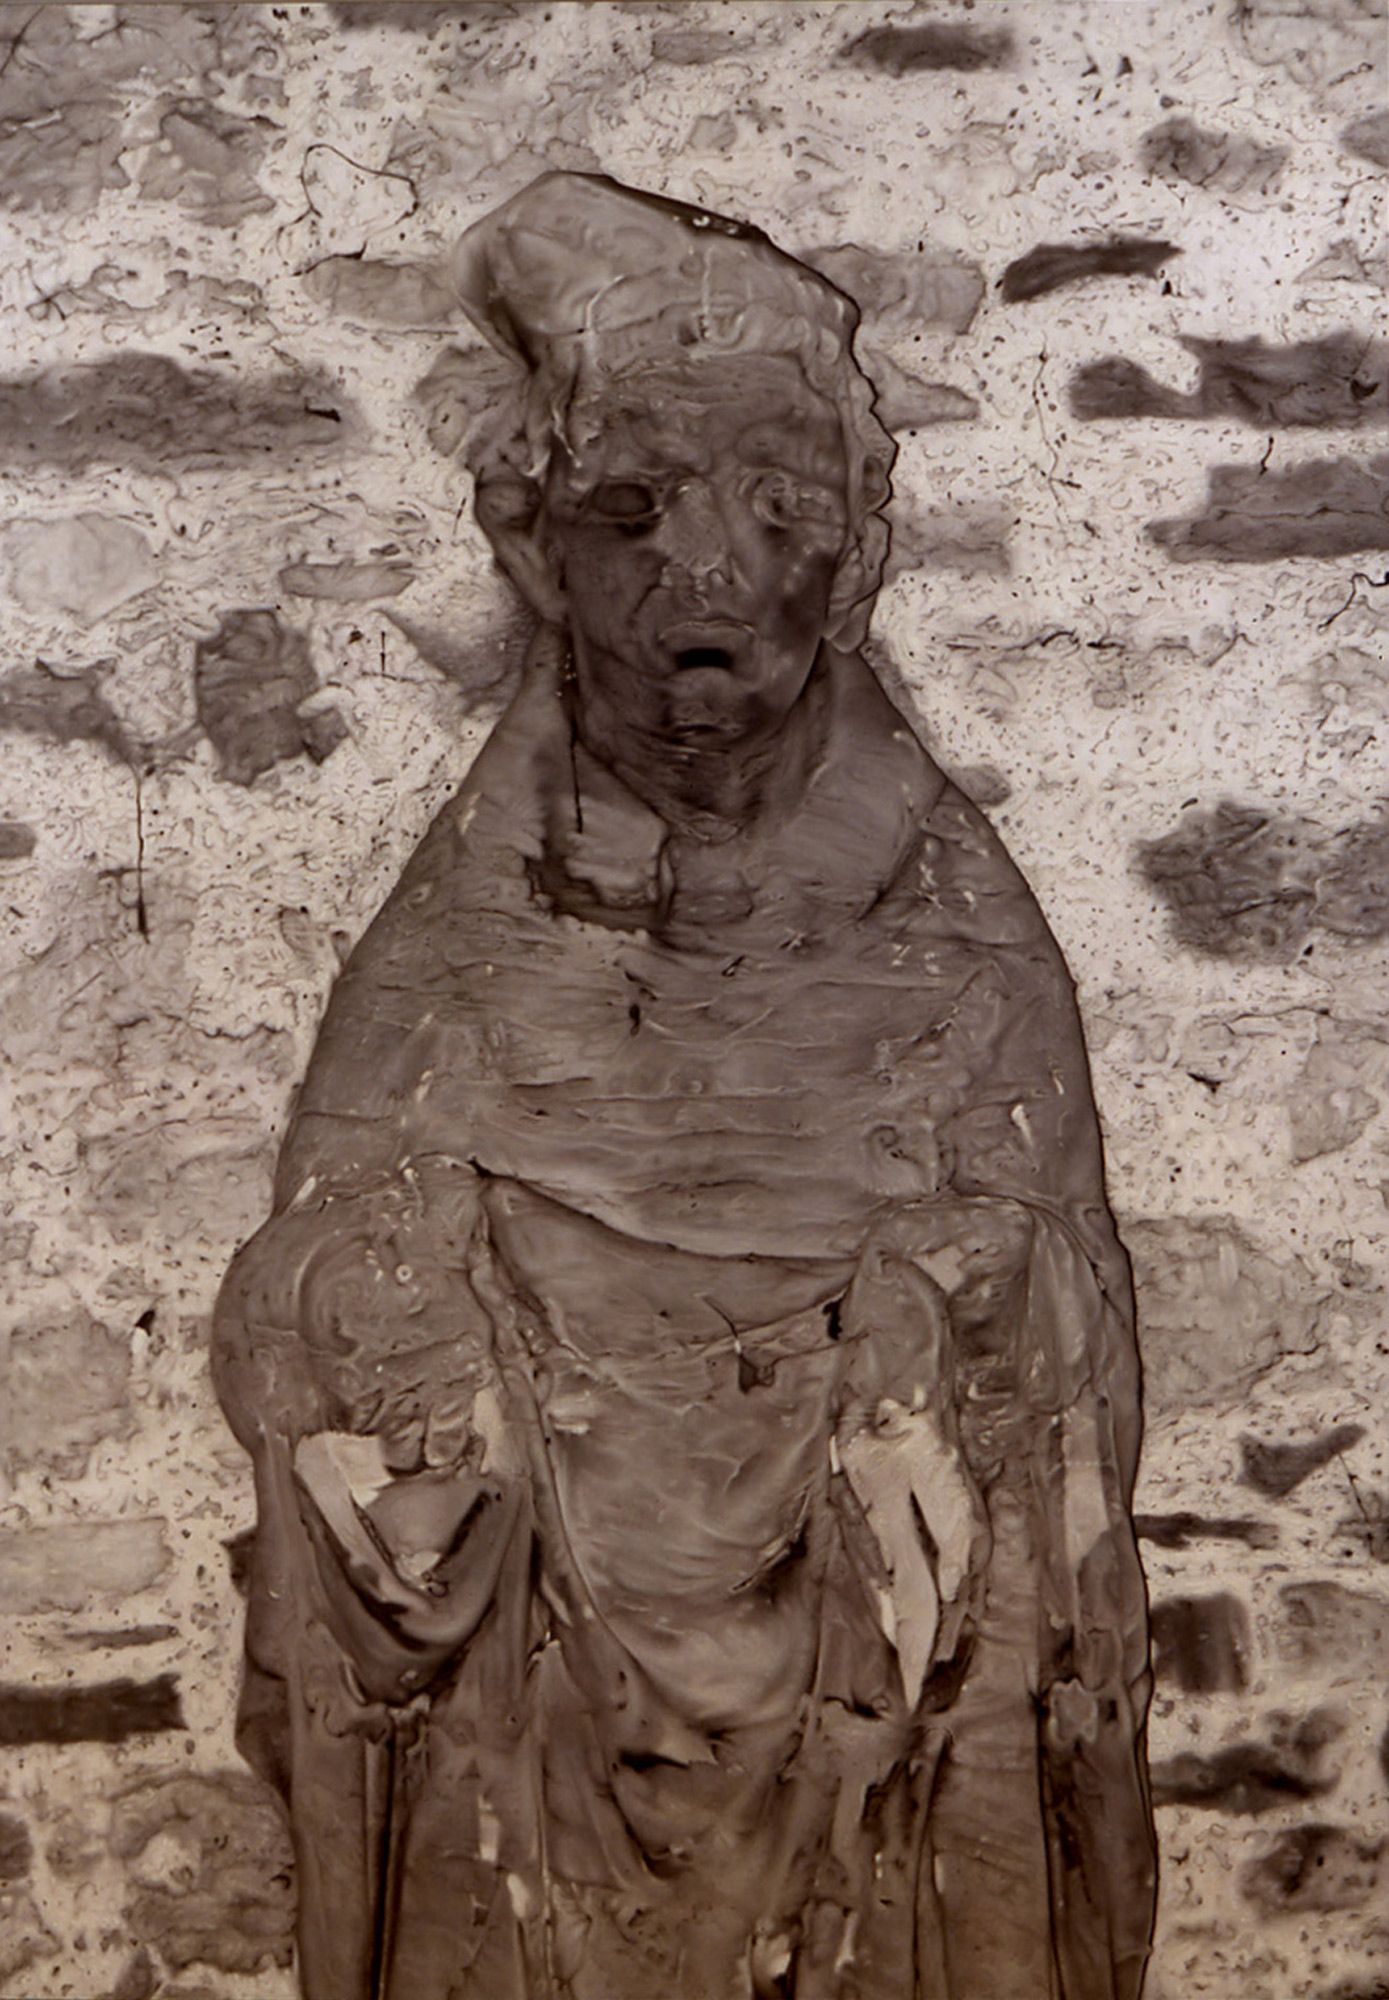 Painting of a medieval ruined saint sculpture falling apart painfully.